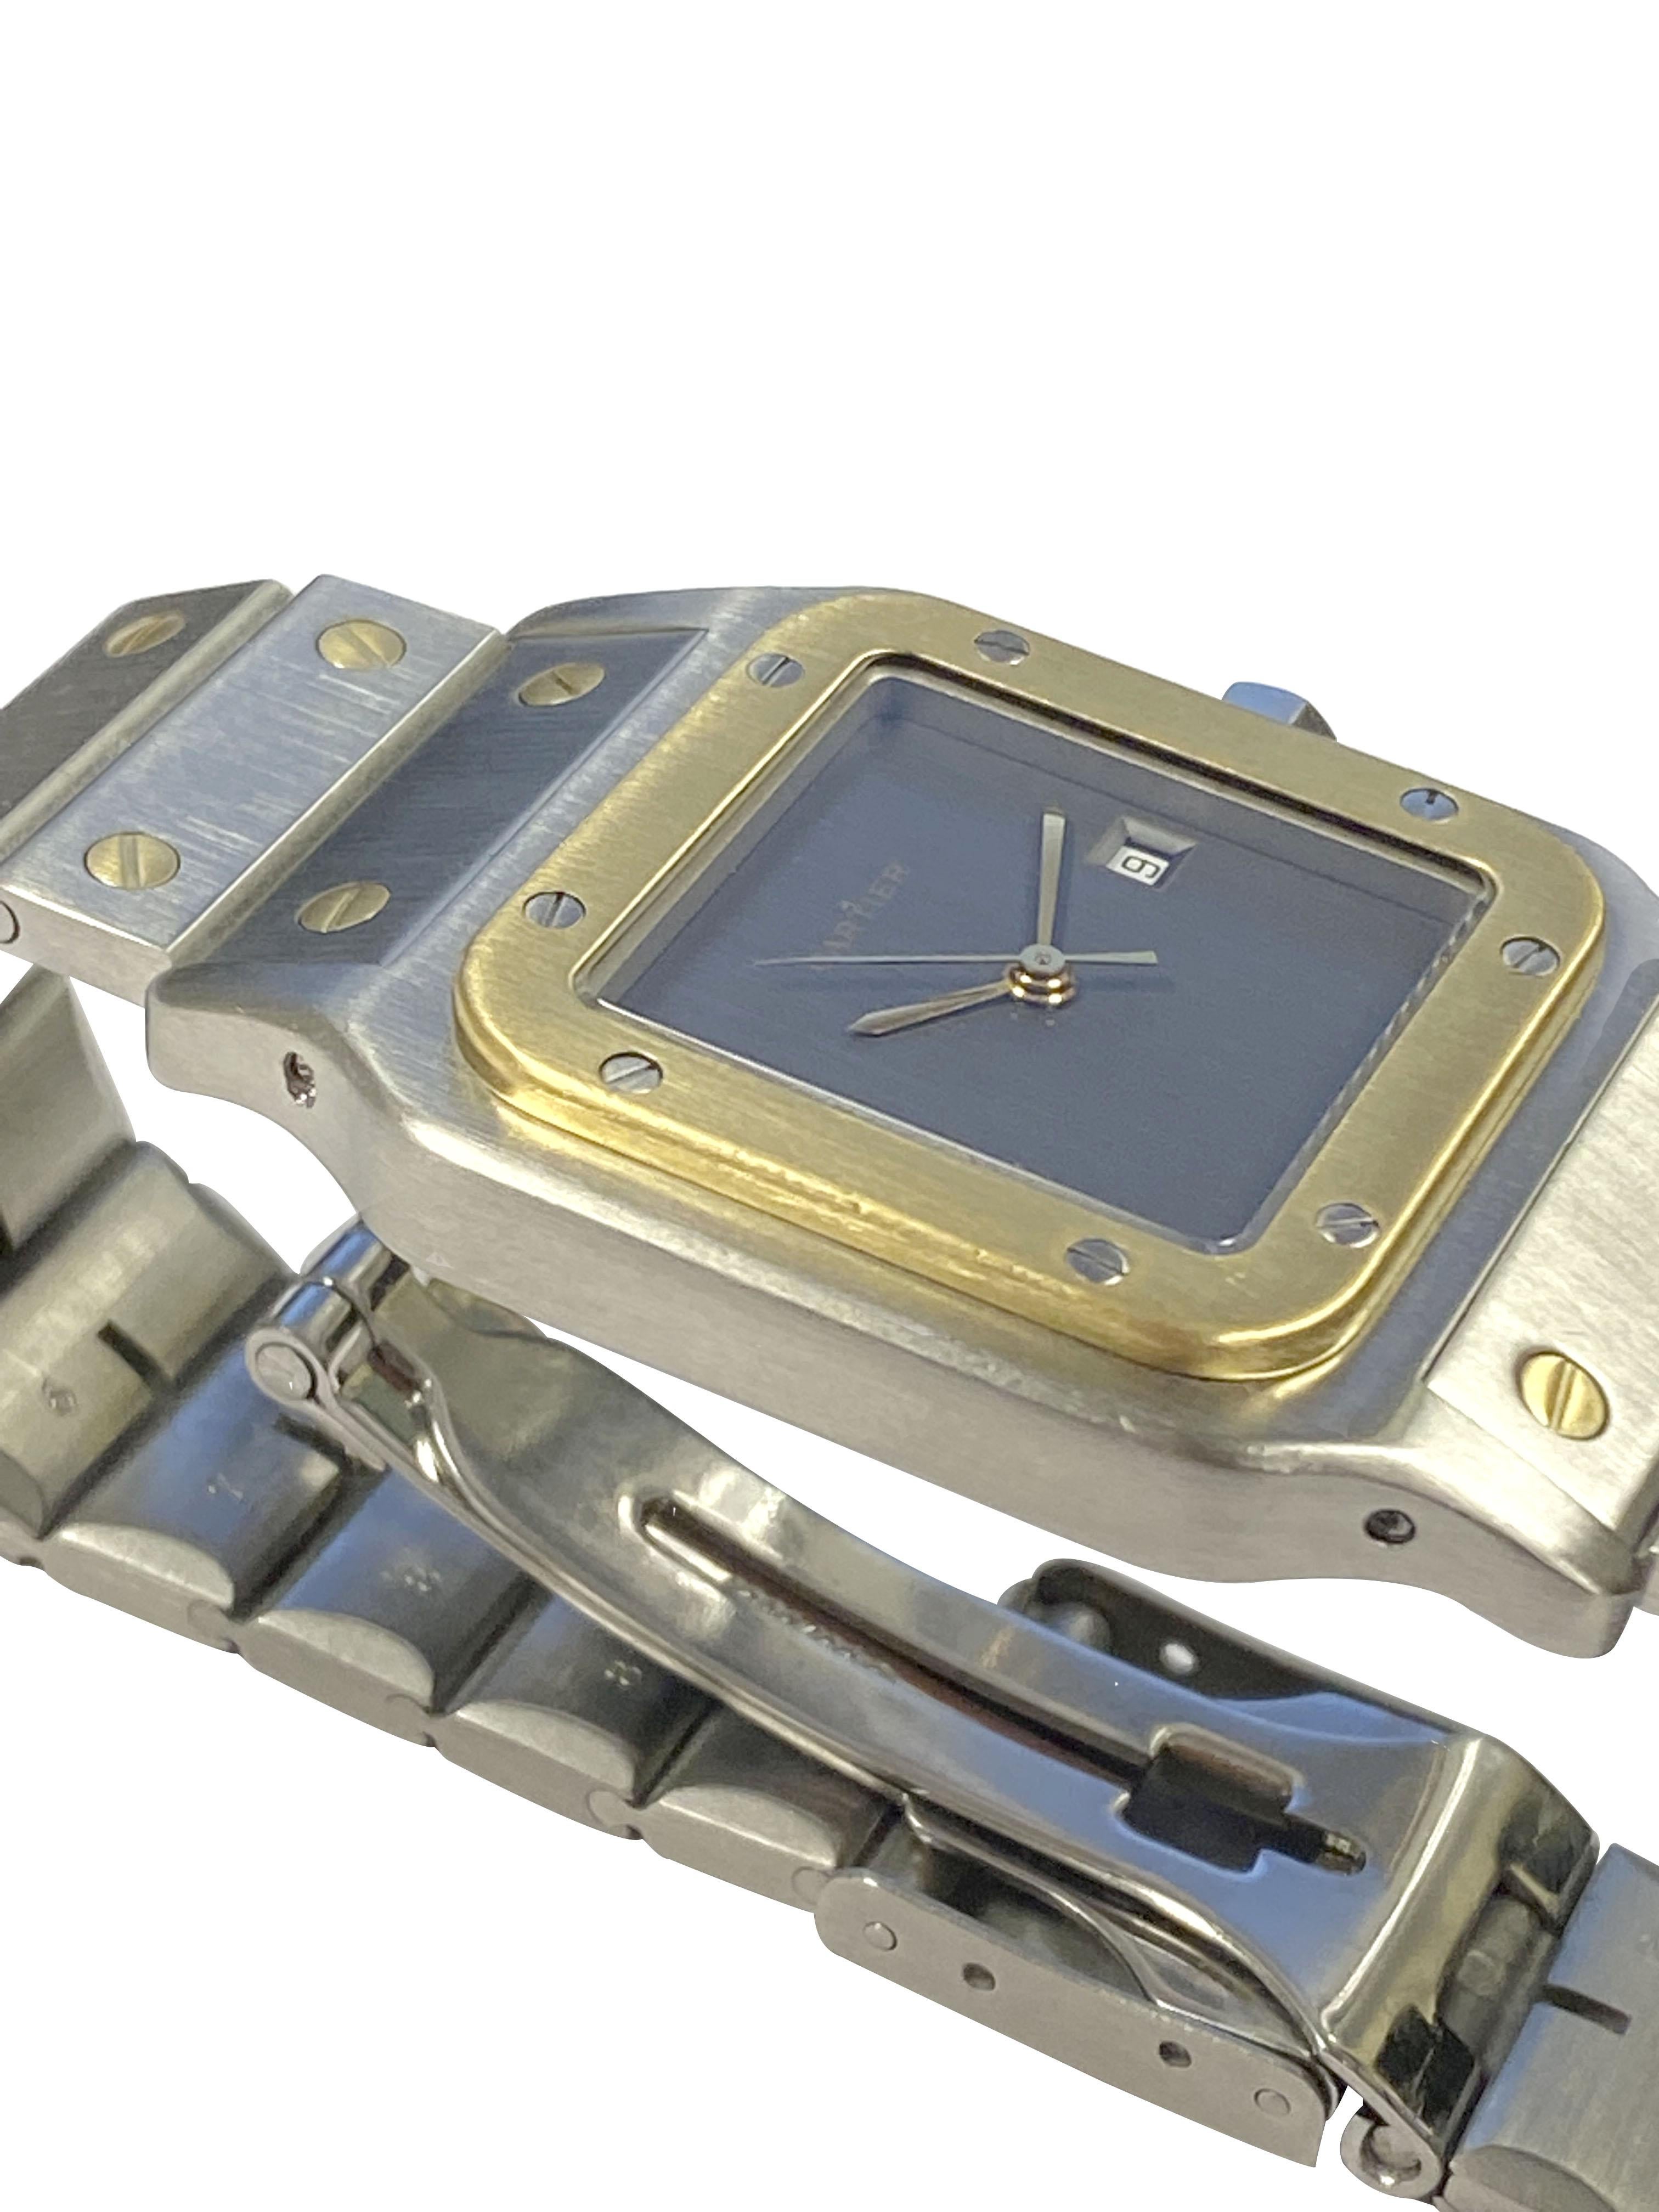 Circa 2000 Cartier Santos Wrist Watch, 40 M.M. lug to Lug X 29 M.M. 2 piece Stainless Steel case with 18K Yellow Gold bezel, Sapphire set Crown.  Automatic, self winding movement, Hard to Find Gray Satin Dial with Calendar window at the 3 and a